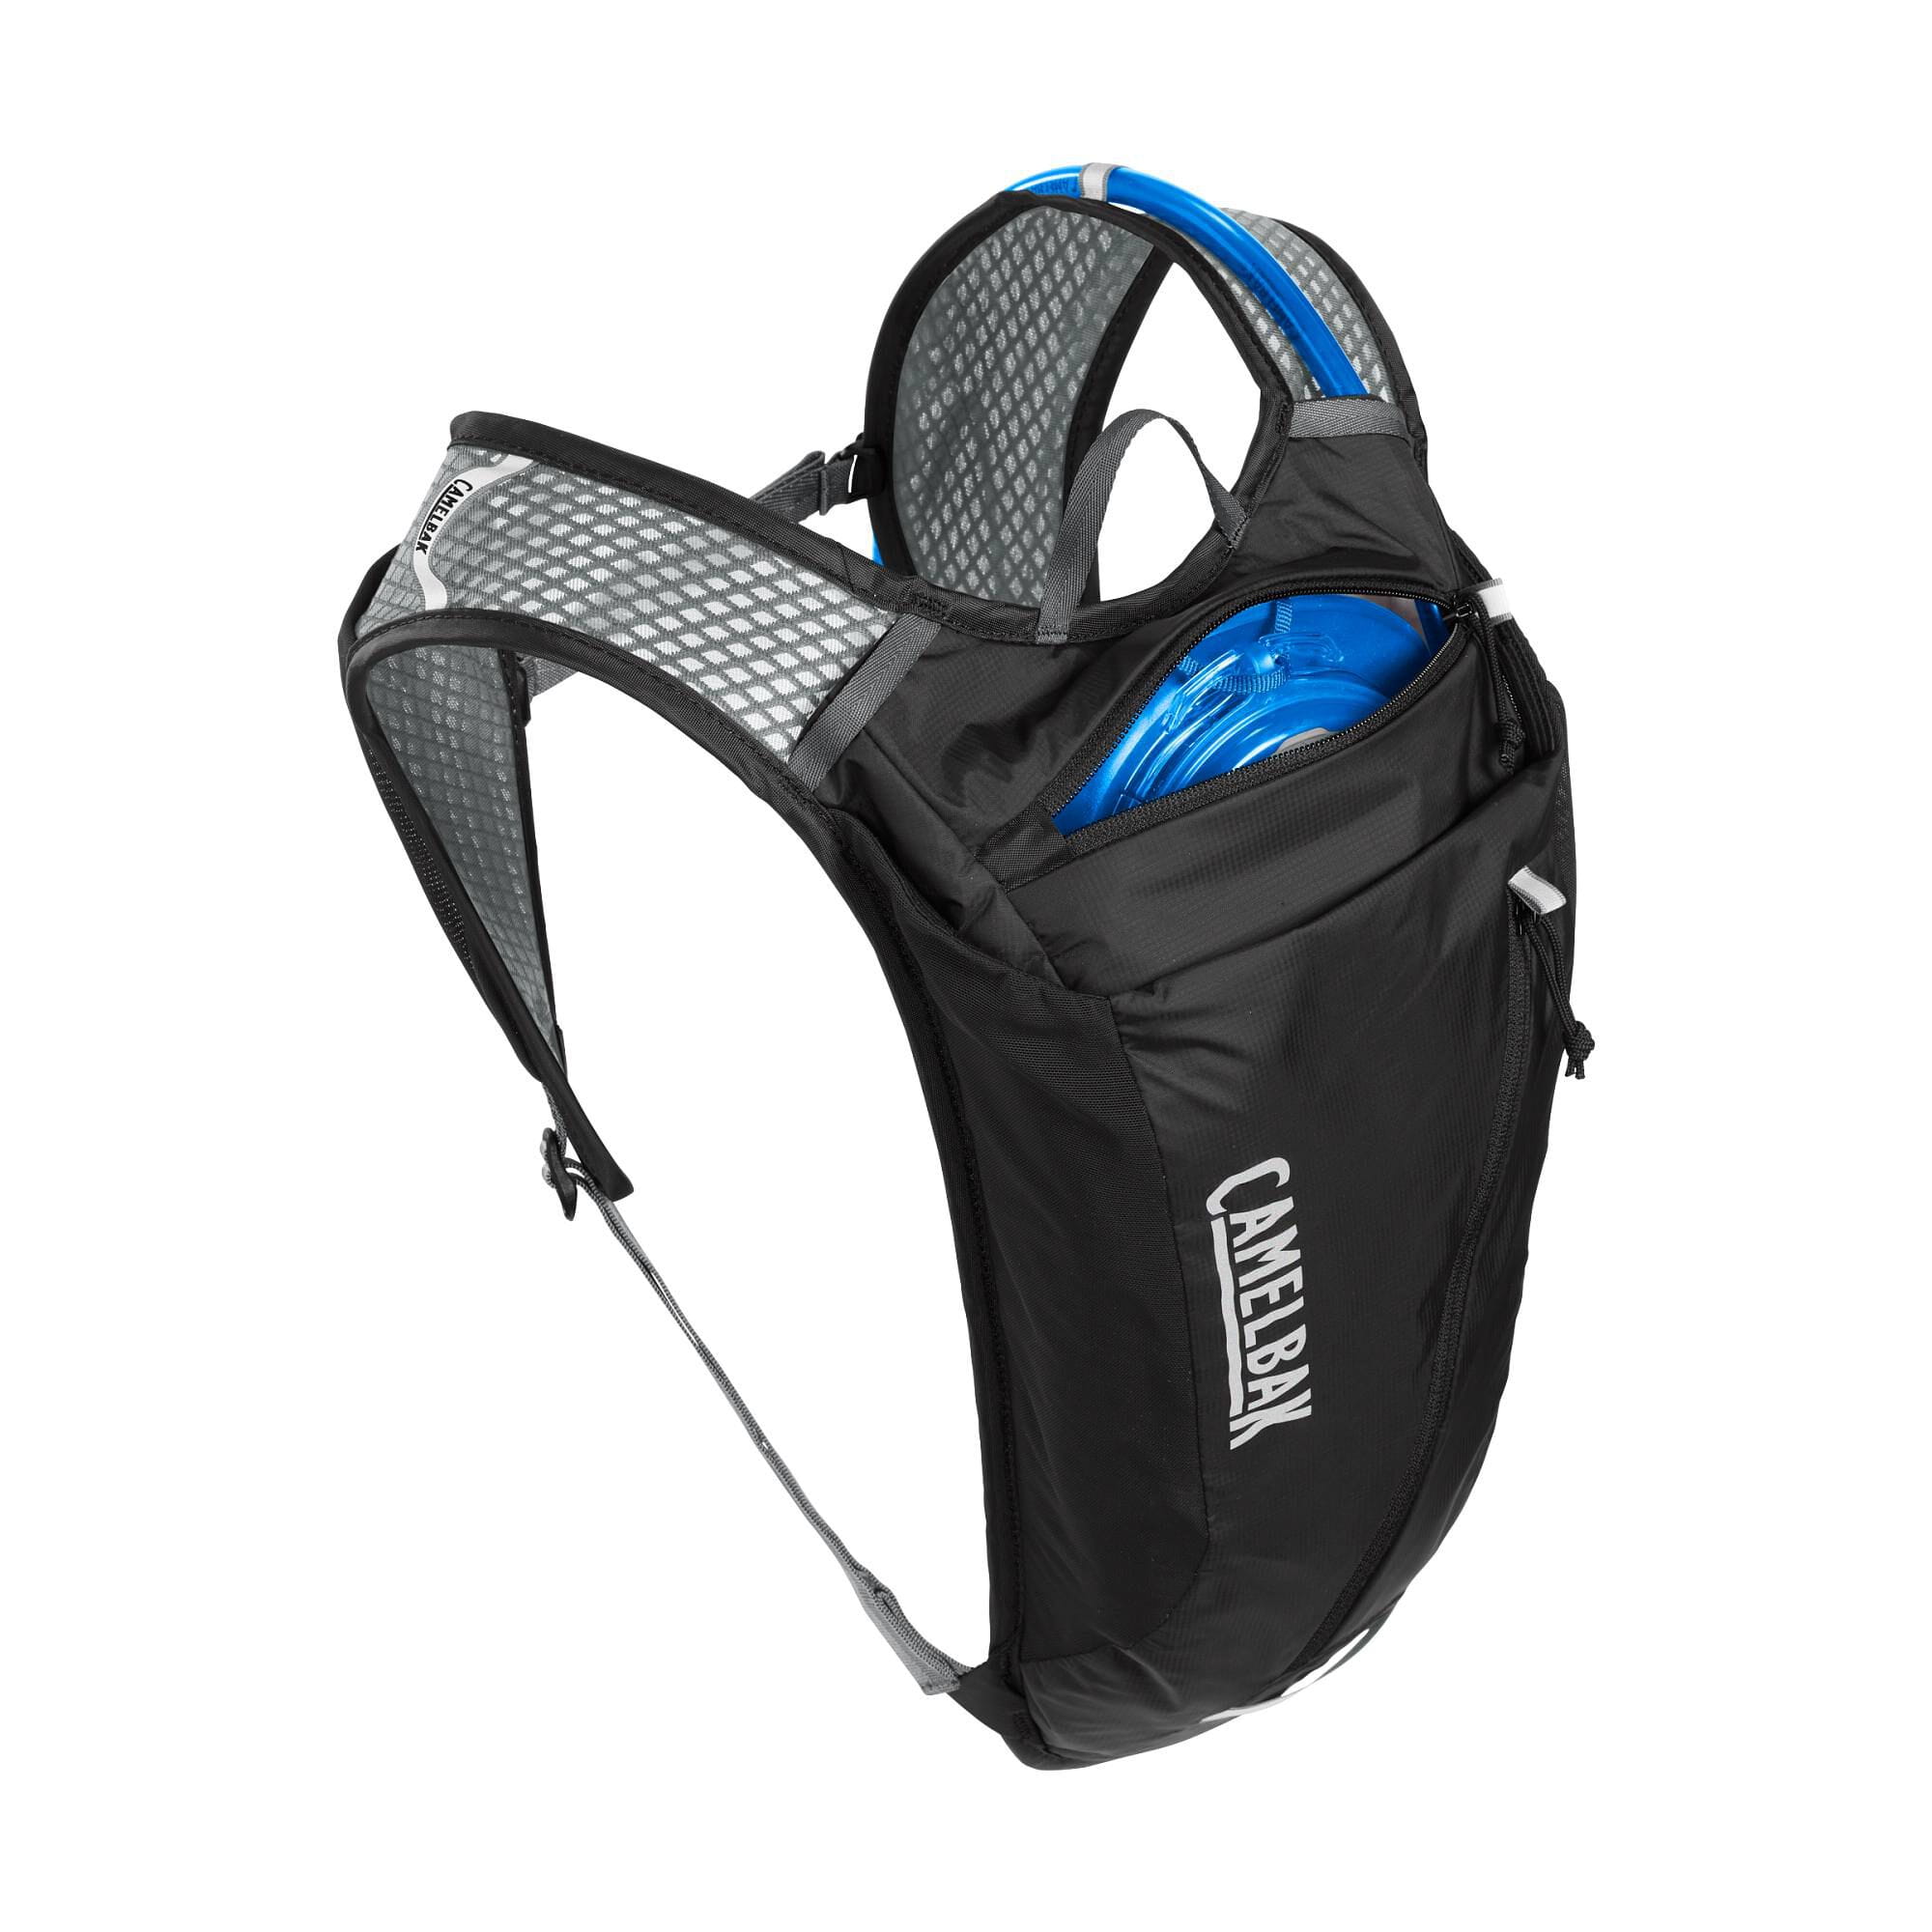 Camelbak Rogue Light 7 L Hydration Backpack with Reservoir